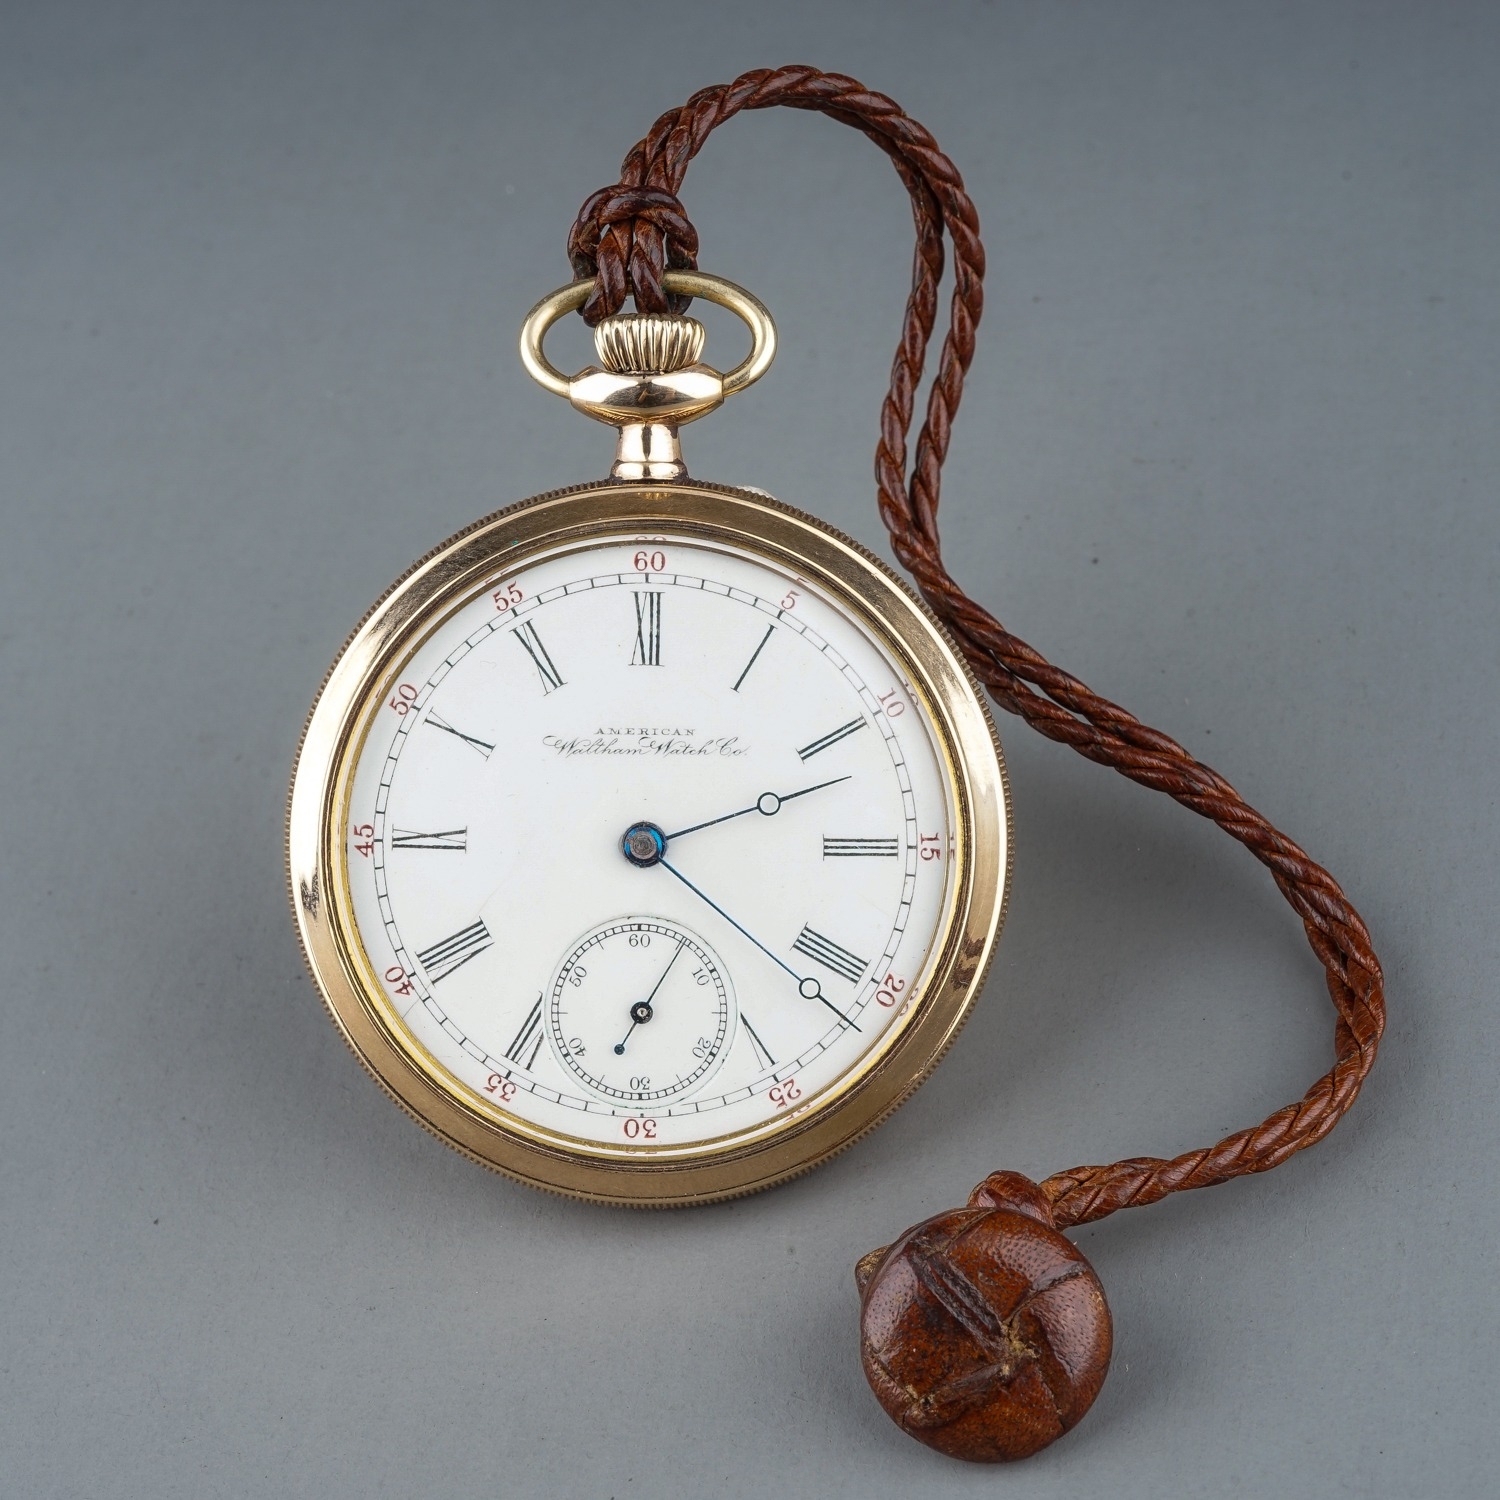 A Waltham Watch Co gold-plated open faced pocket watch, 43mm white enamel dial, 50mm case, Roman